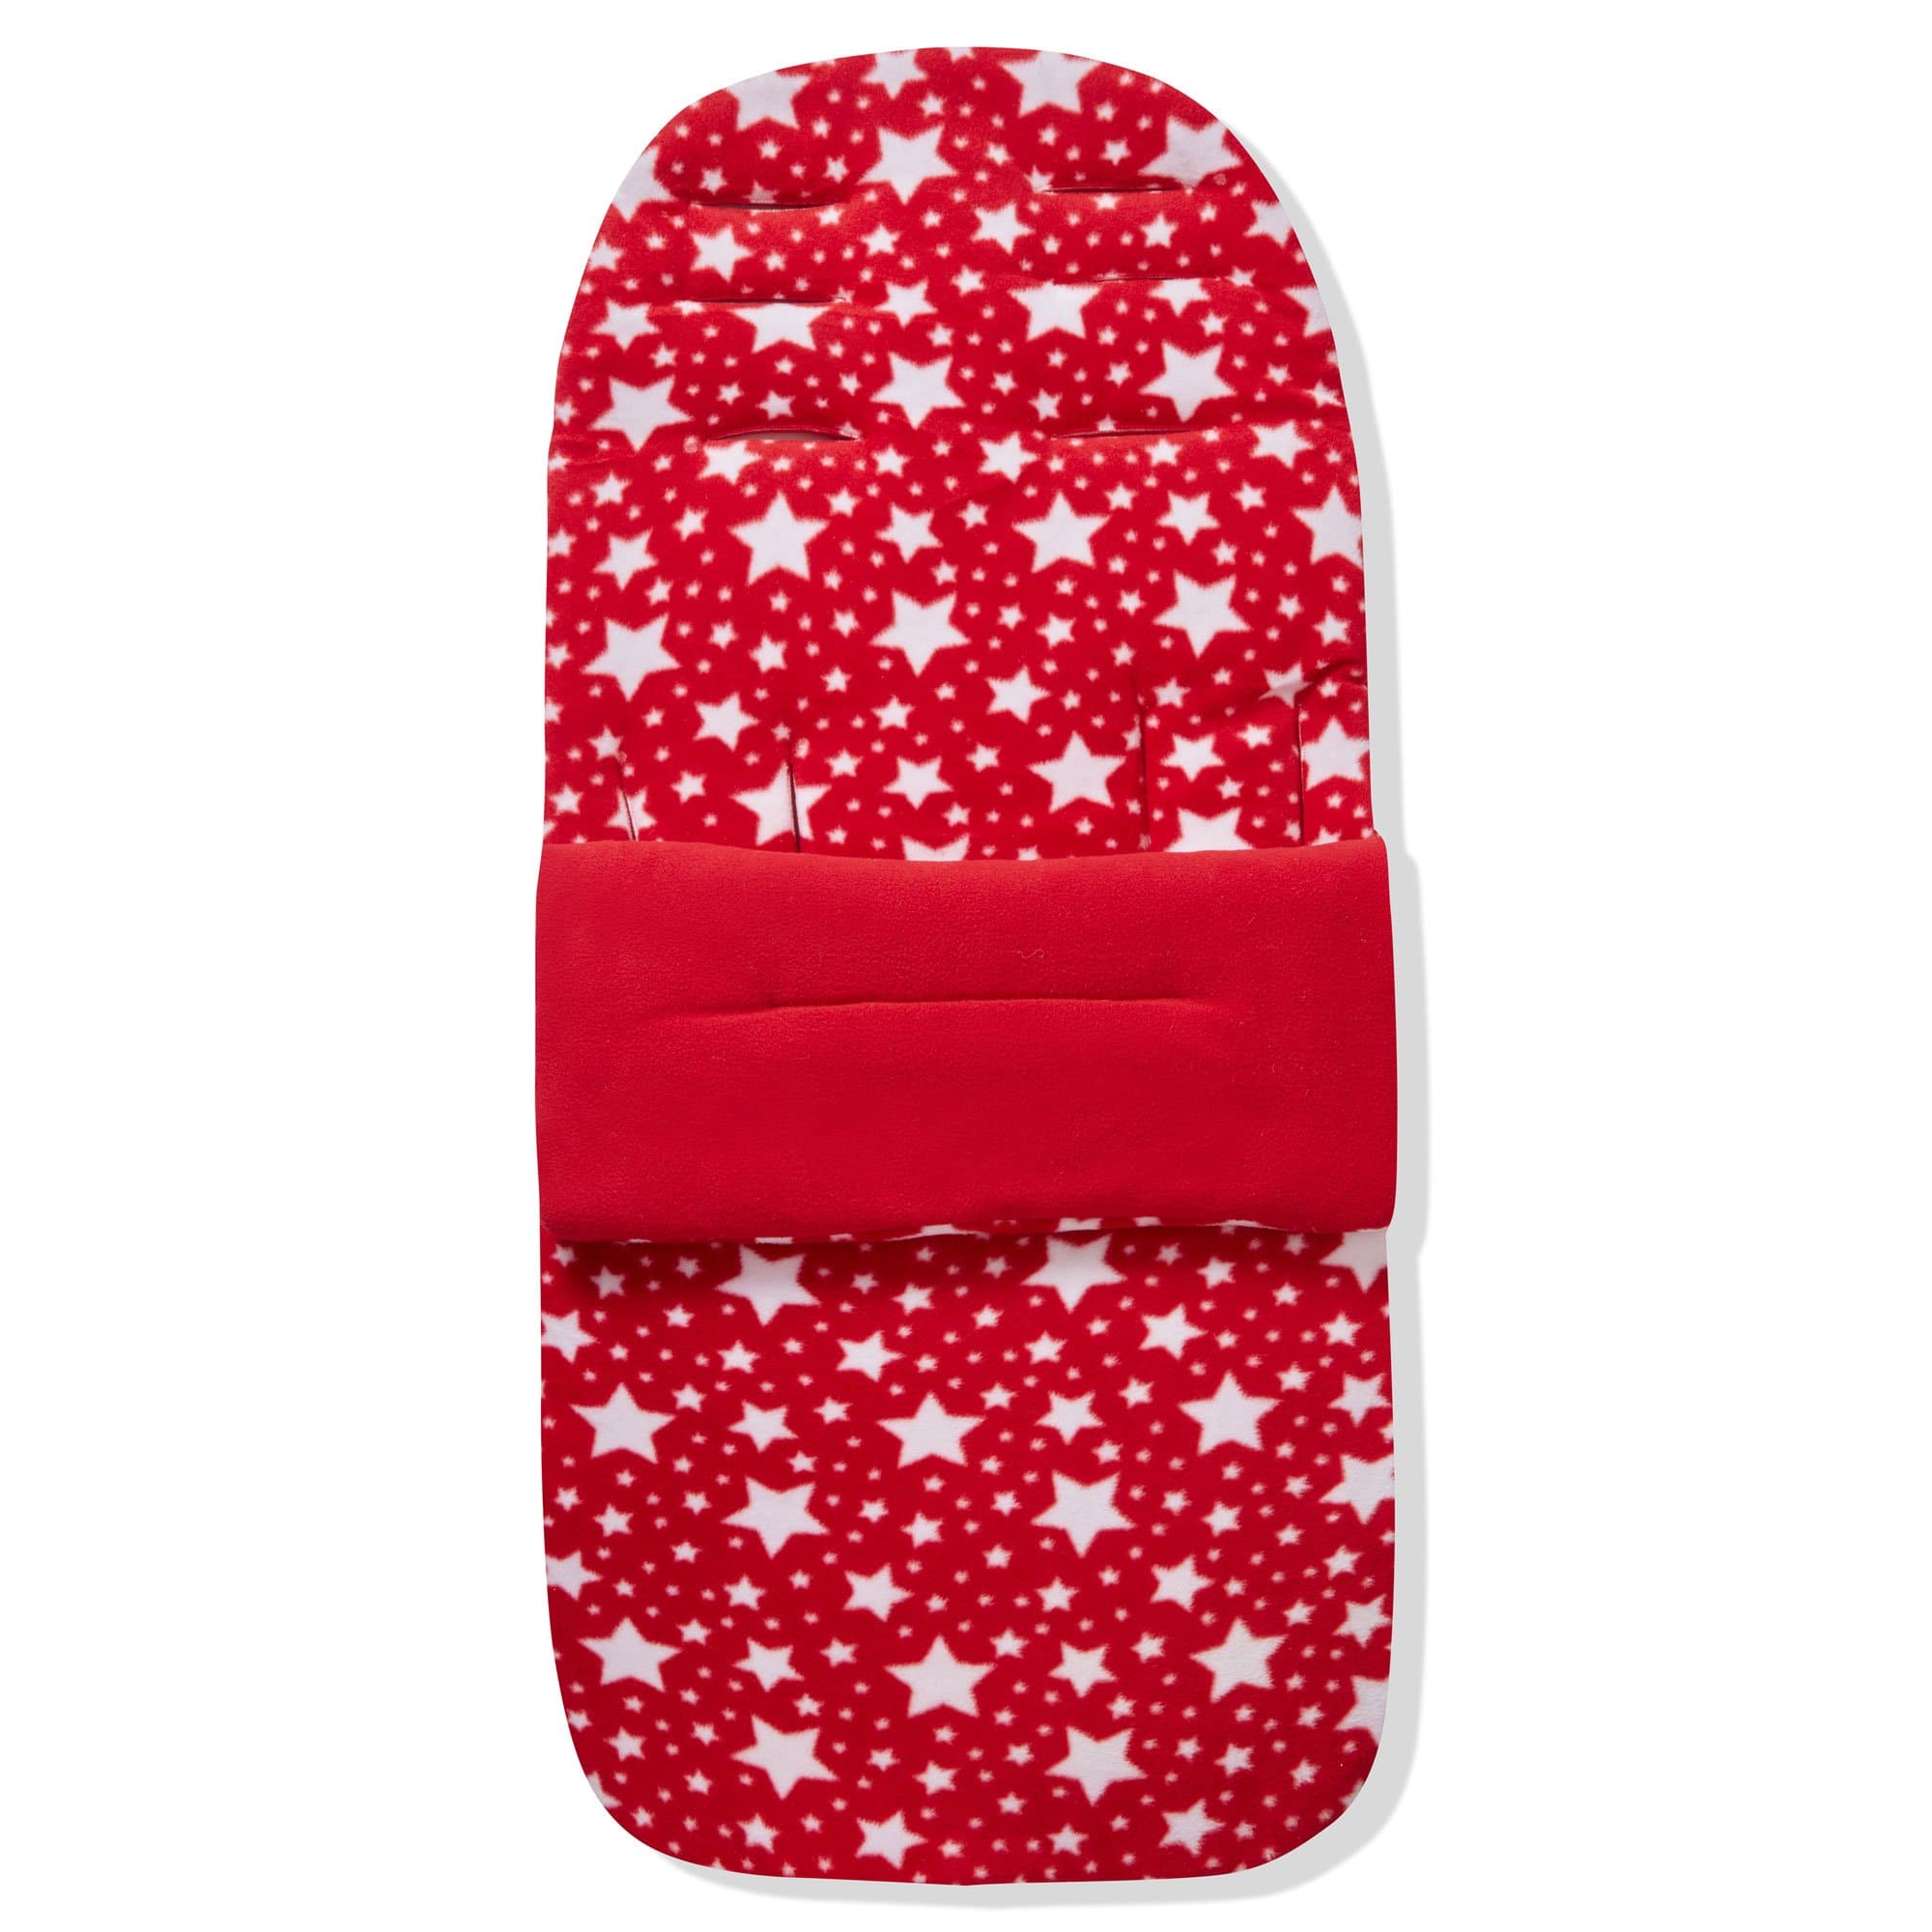 Fleece Footmuff / Cosy Toes Compatible with Mutsy - Red Star / Fits All Models | For Your Little One